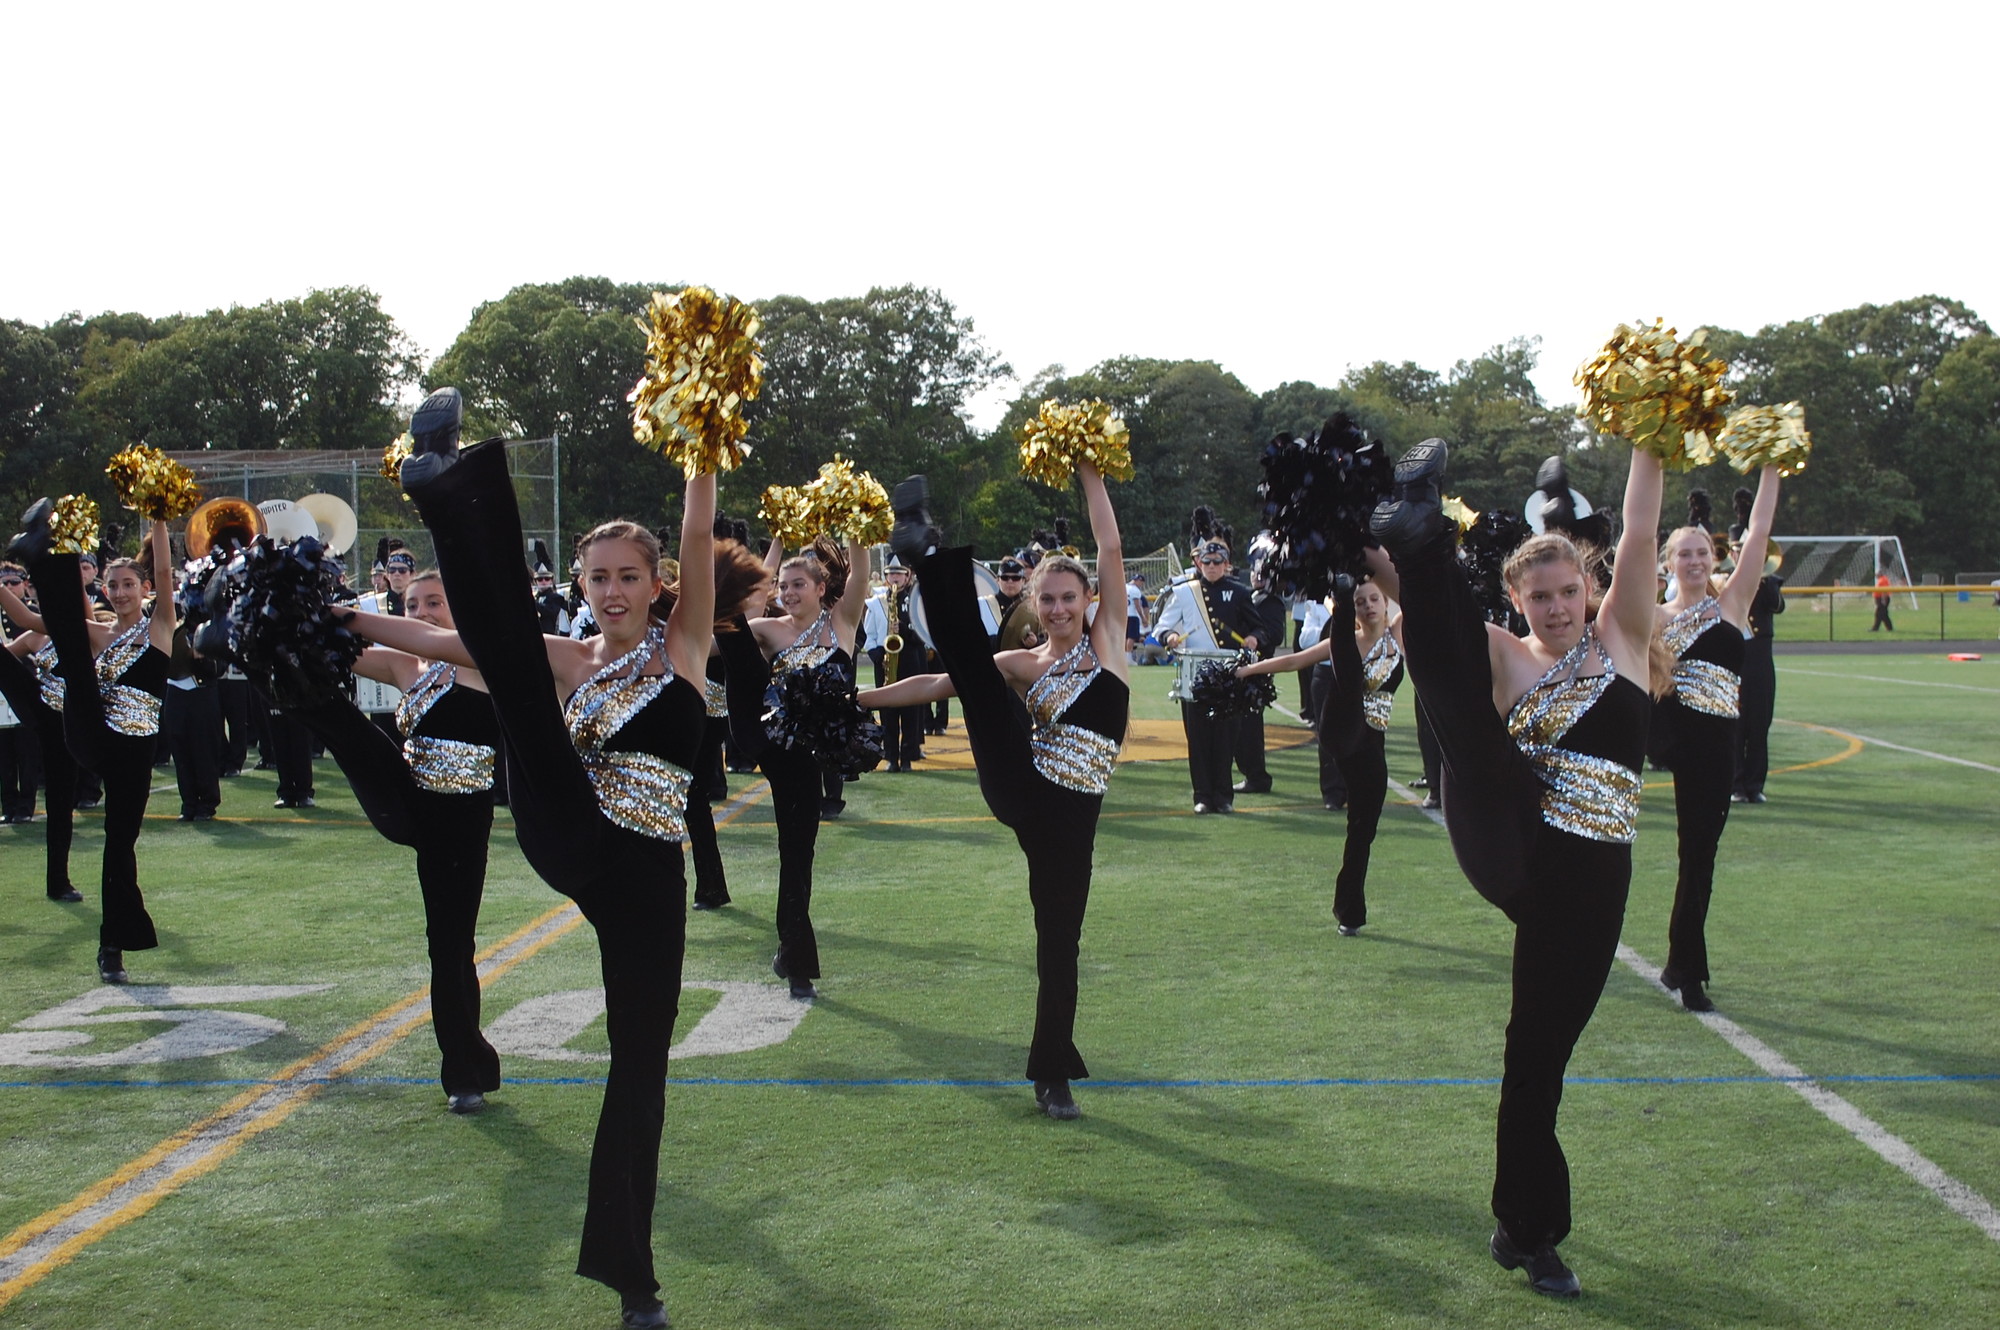 The Wantagh High School marching band and dance team gave the crowd a show during halftime of the Warriors 27-0 win over Long Beach last Saturday in the Homecoming game.